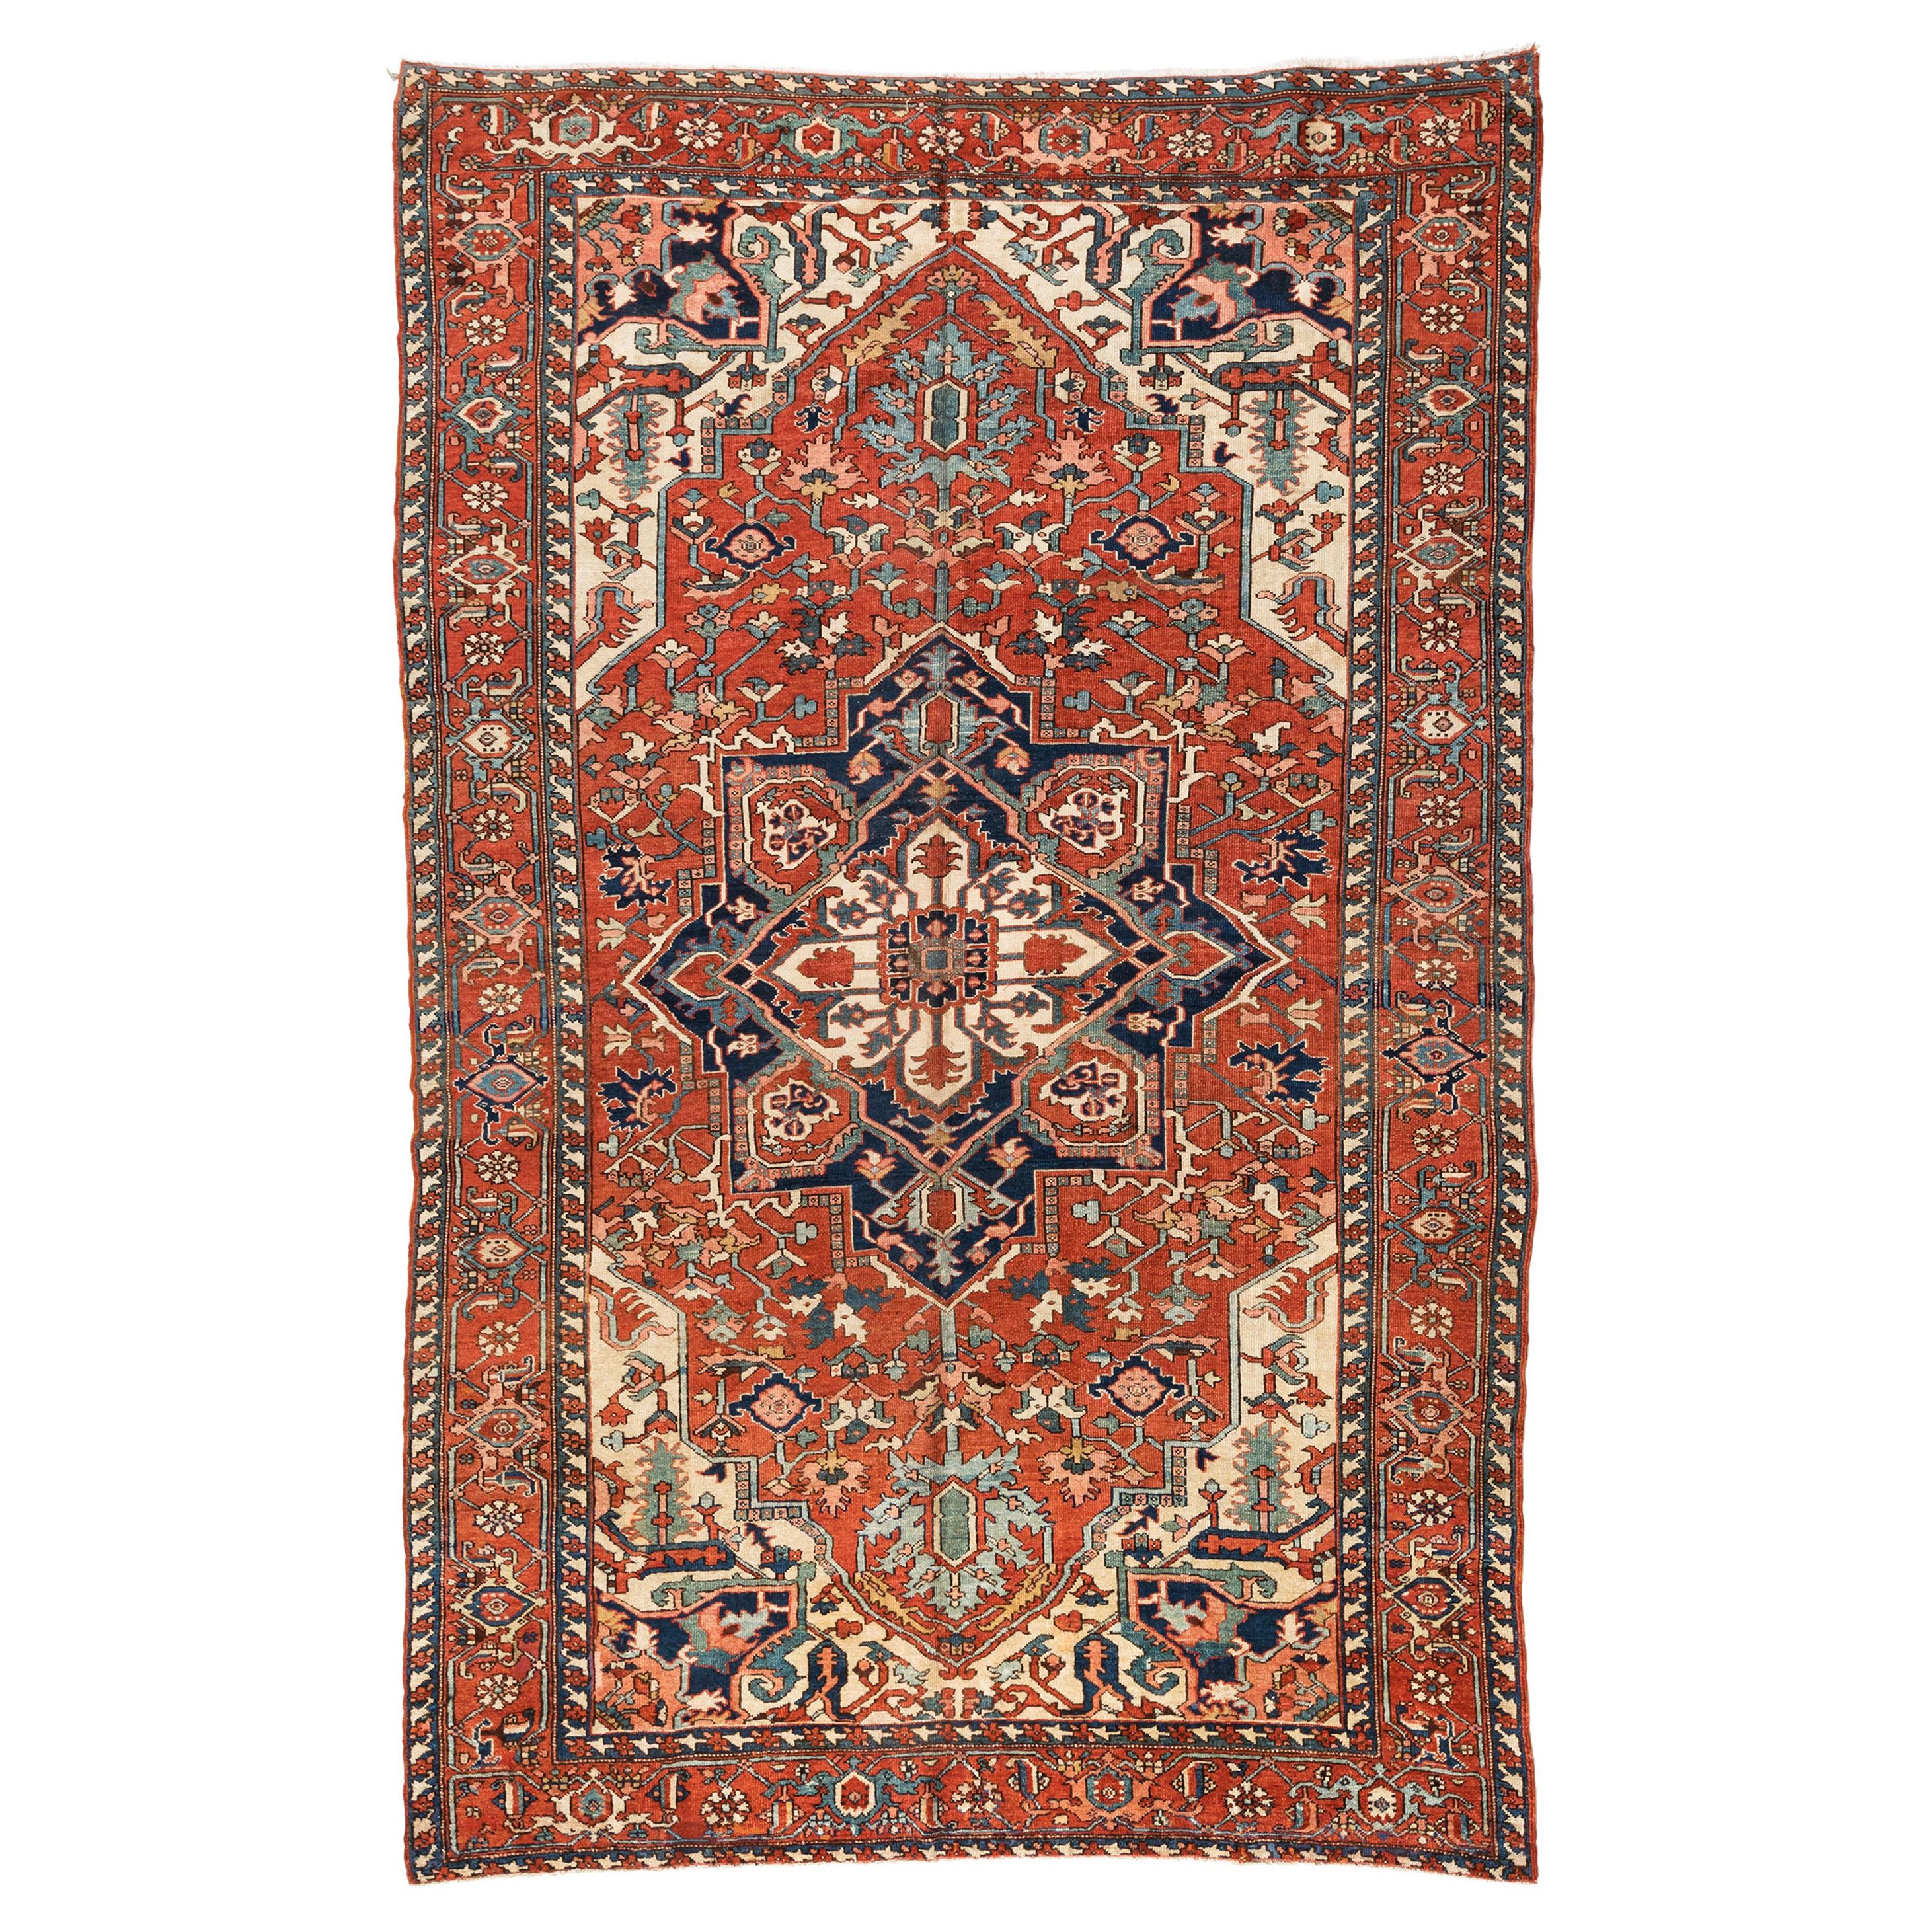 Antique Persian Red Ivory and Blue Serapi Rug, circa 1920-1930 For Sale